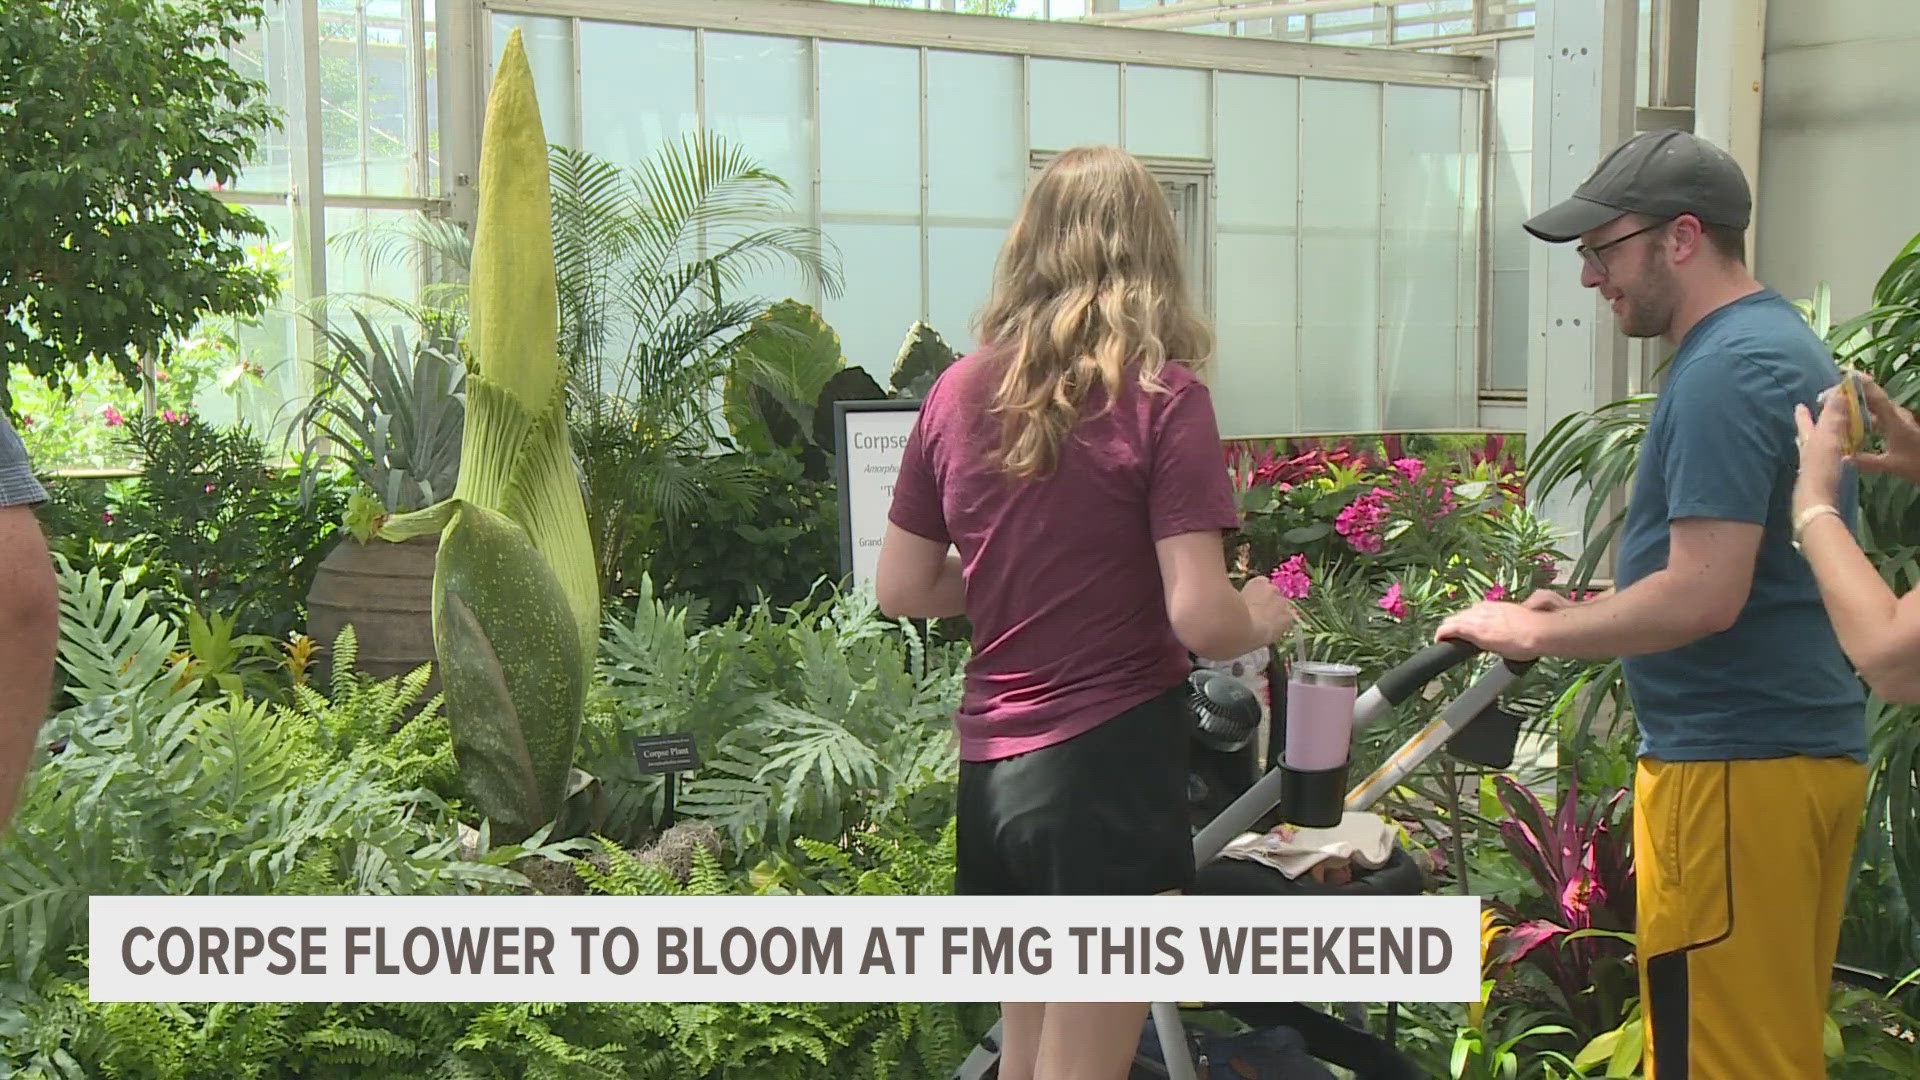 The corpse flower, which smells like rotting flesh when it blooms, is expected to bloom at Meijer Gardens this weekend.